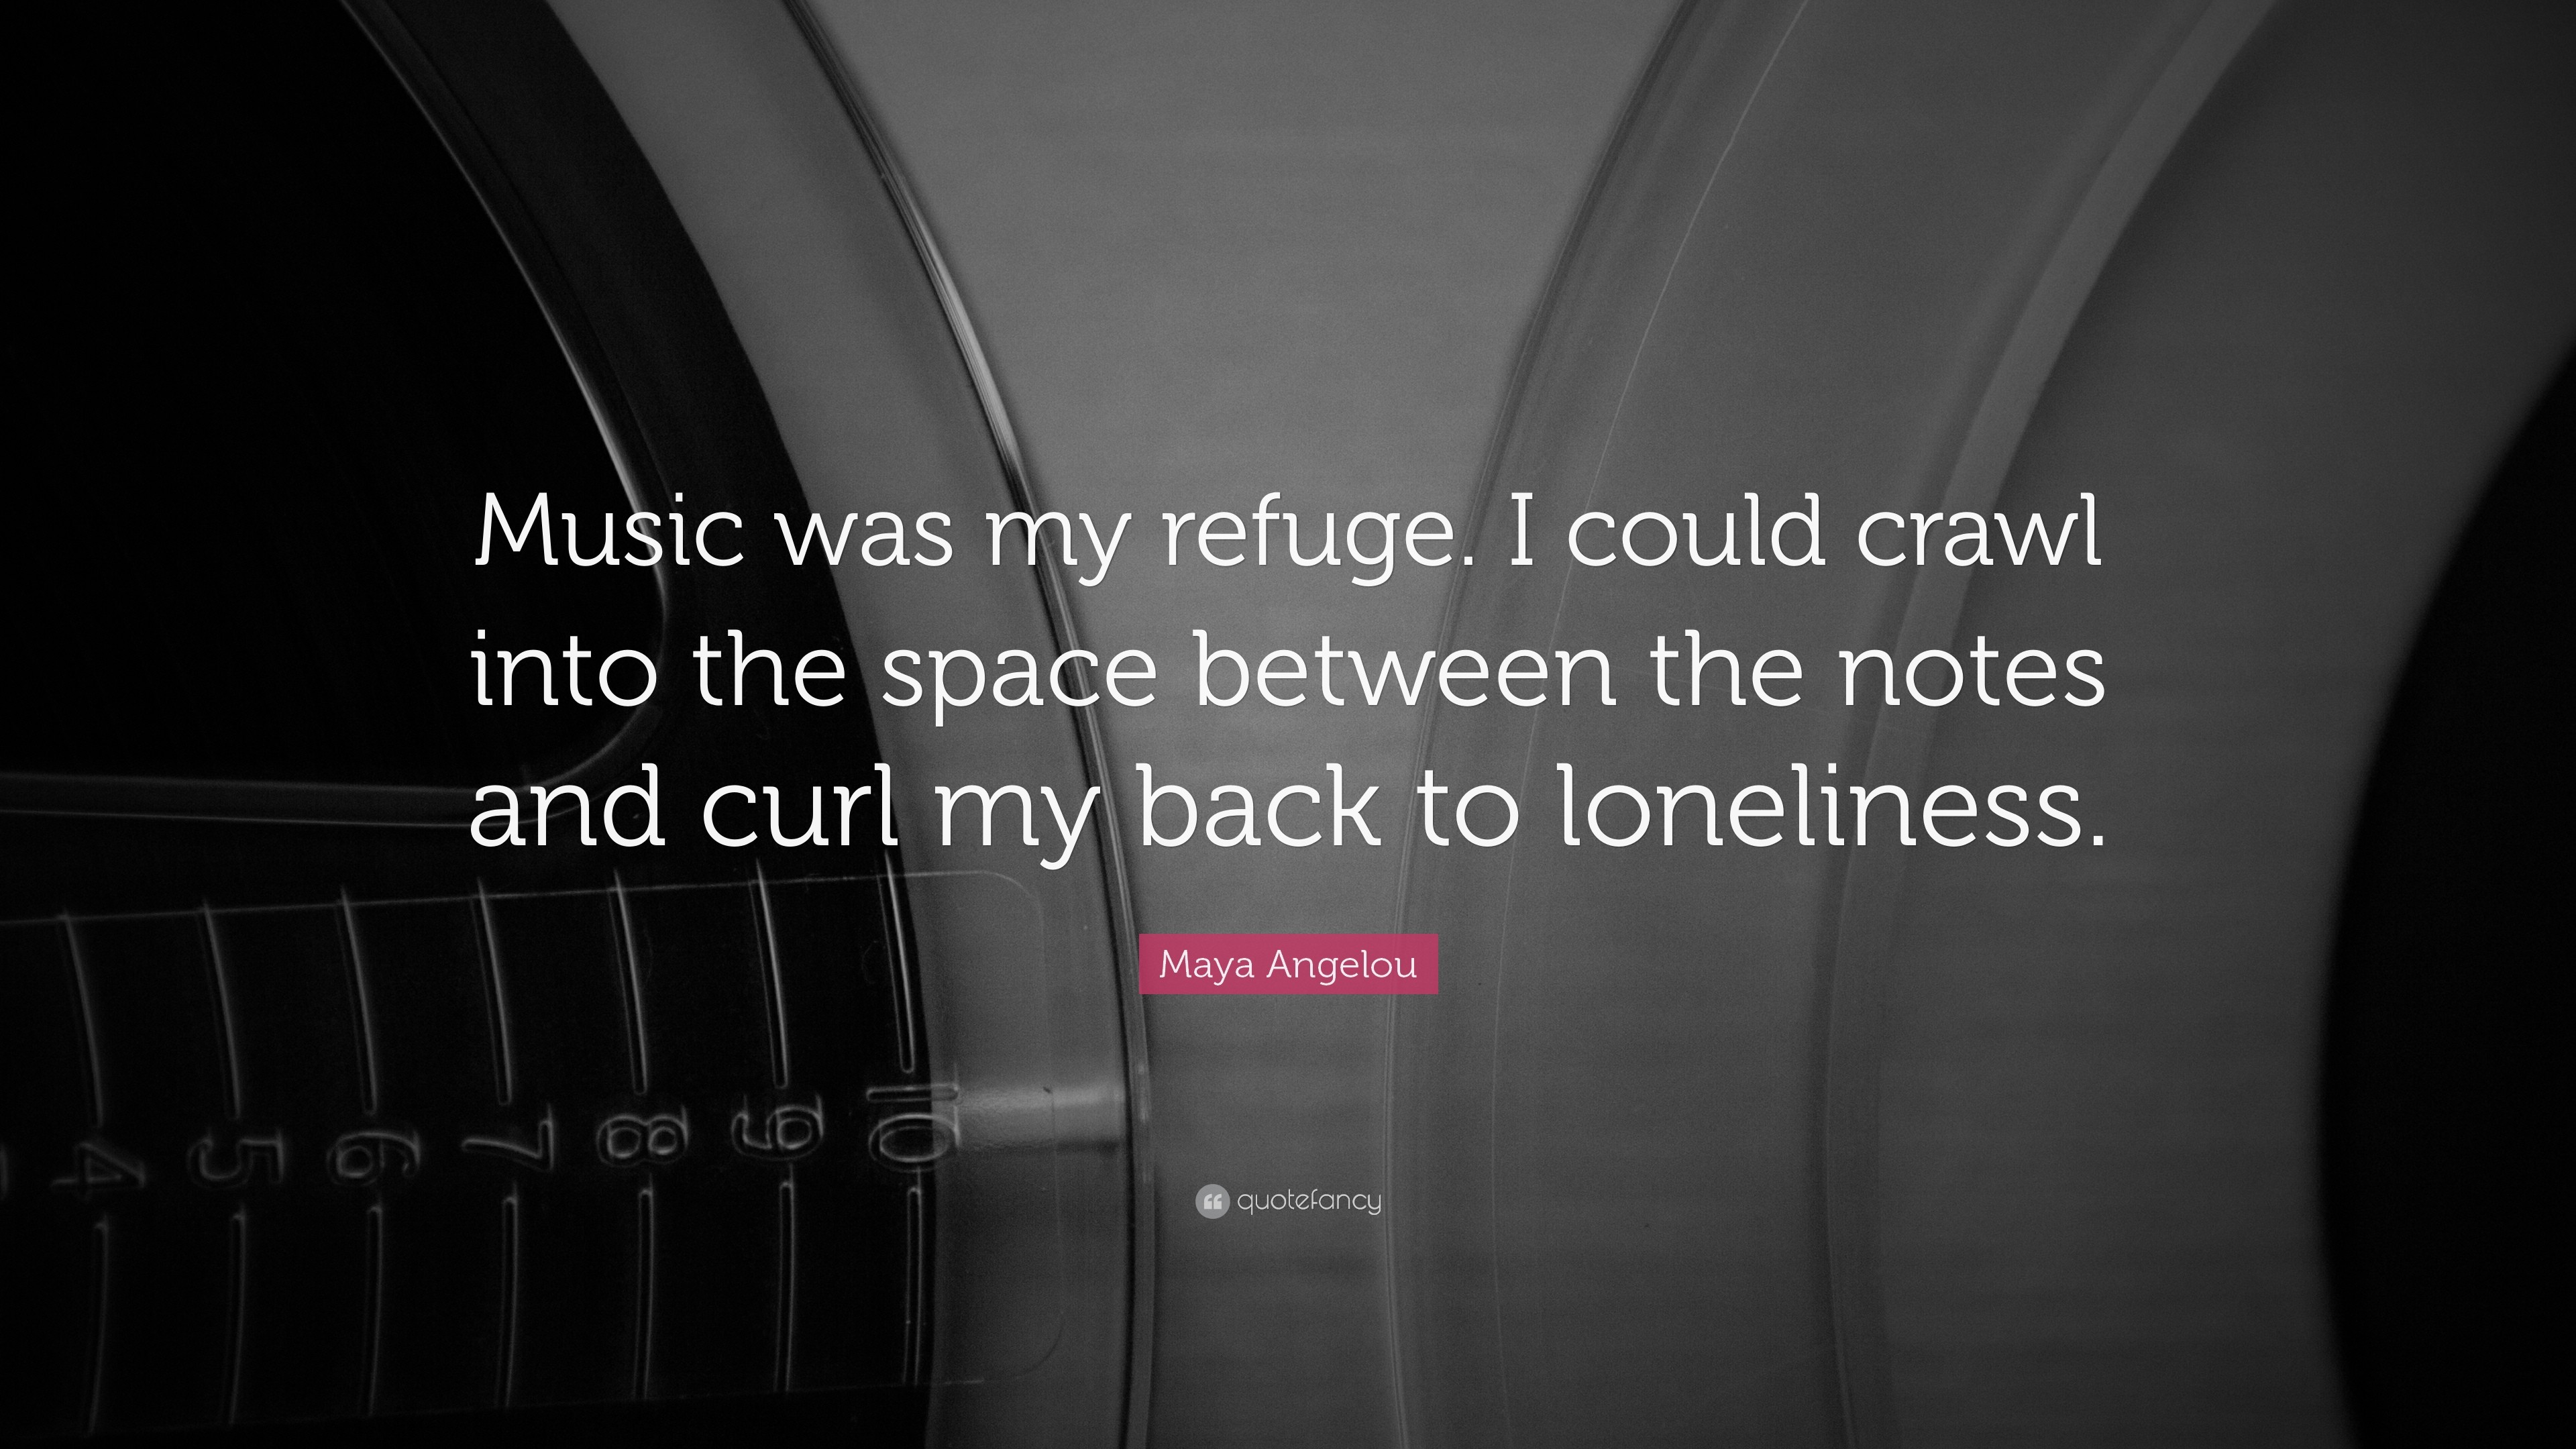 Music Quotes: “Music was my refuge. I could crawl into the space between